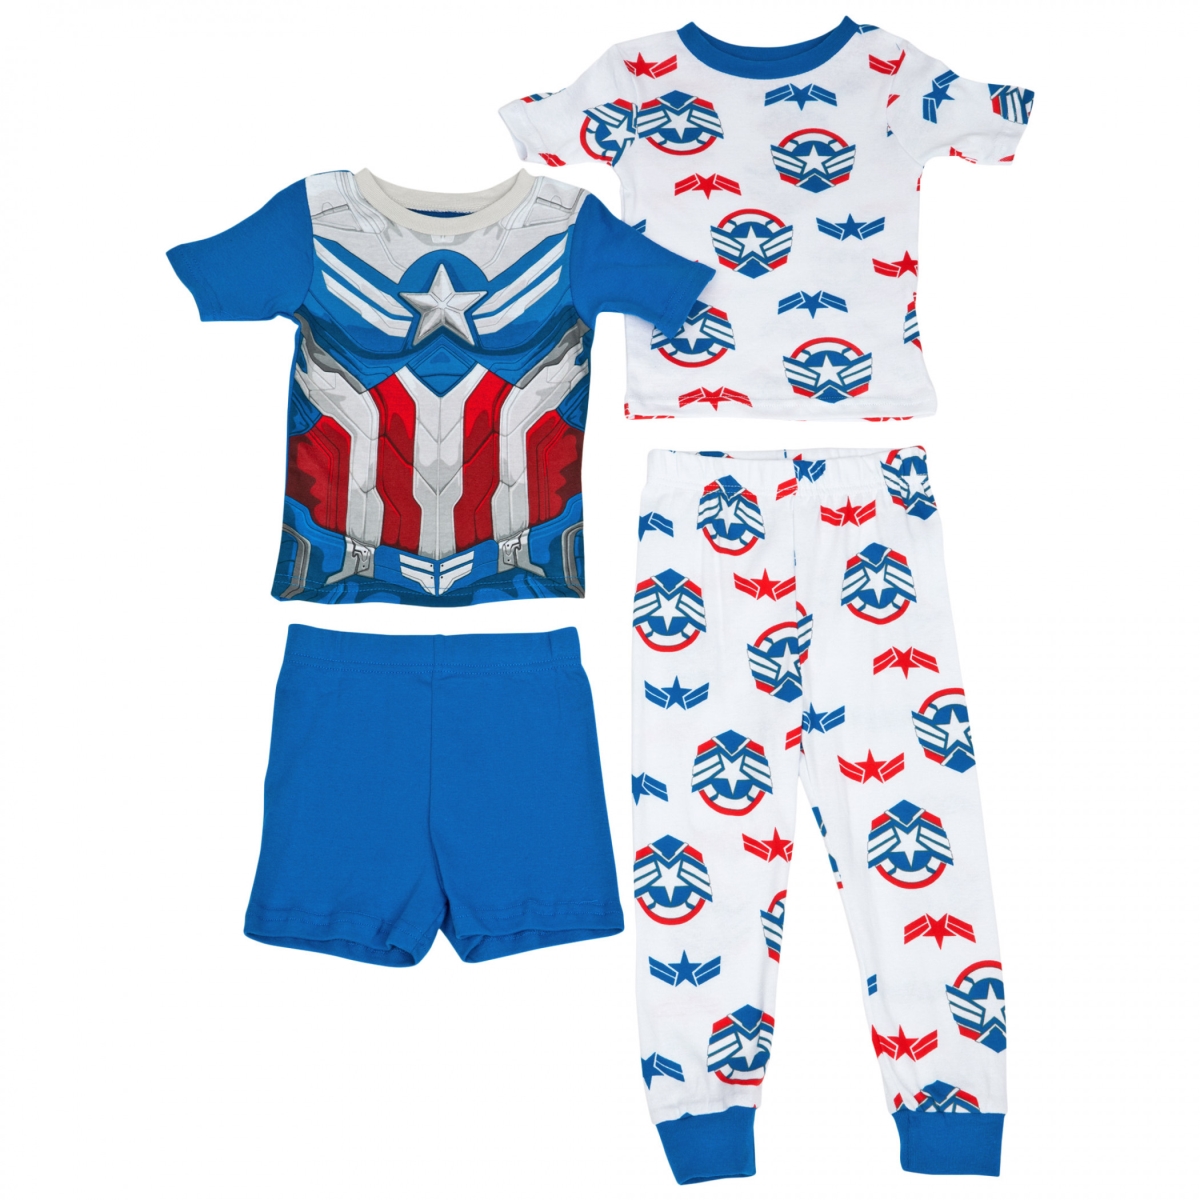 Picture of Captain America 838712-size8 Captain America Youth Shirts Shorts & Pants Set - Size 8 - 4 Piece